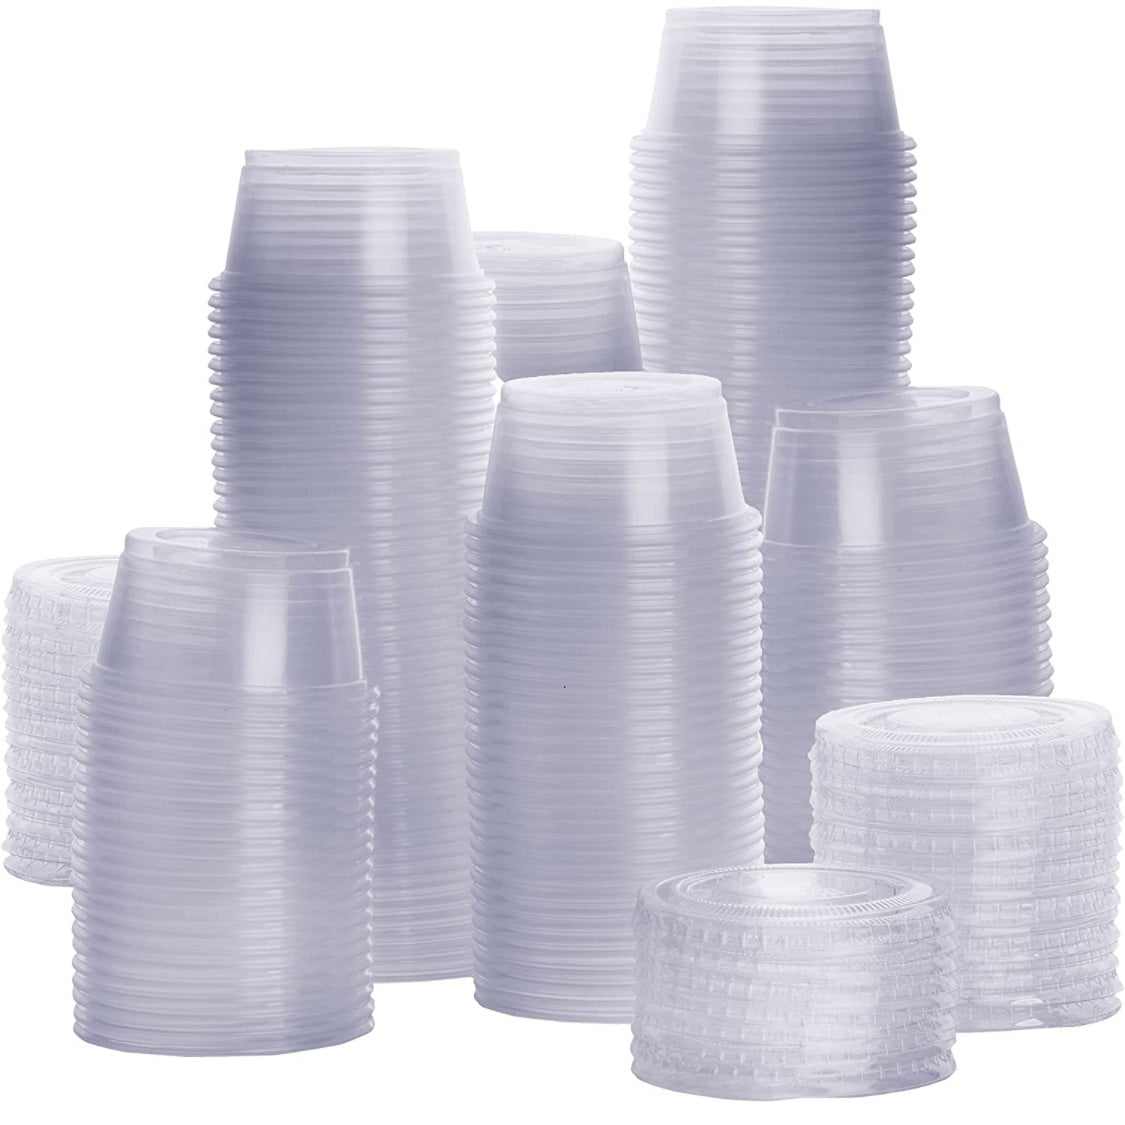 Disposable Clear Cups With Lids Mini Cups For Sauces, Condiments